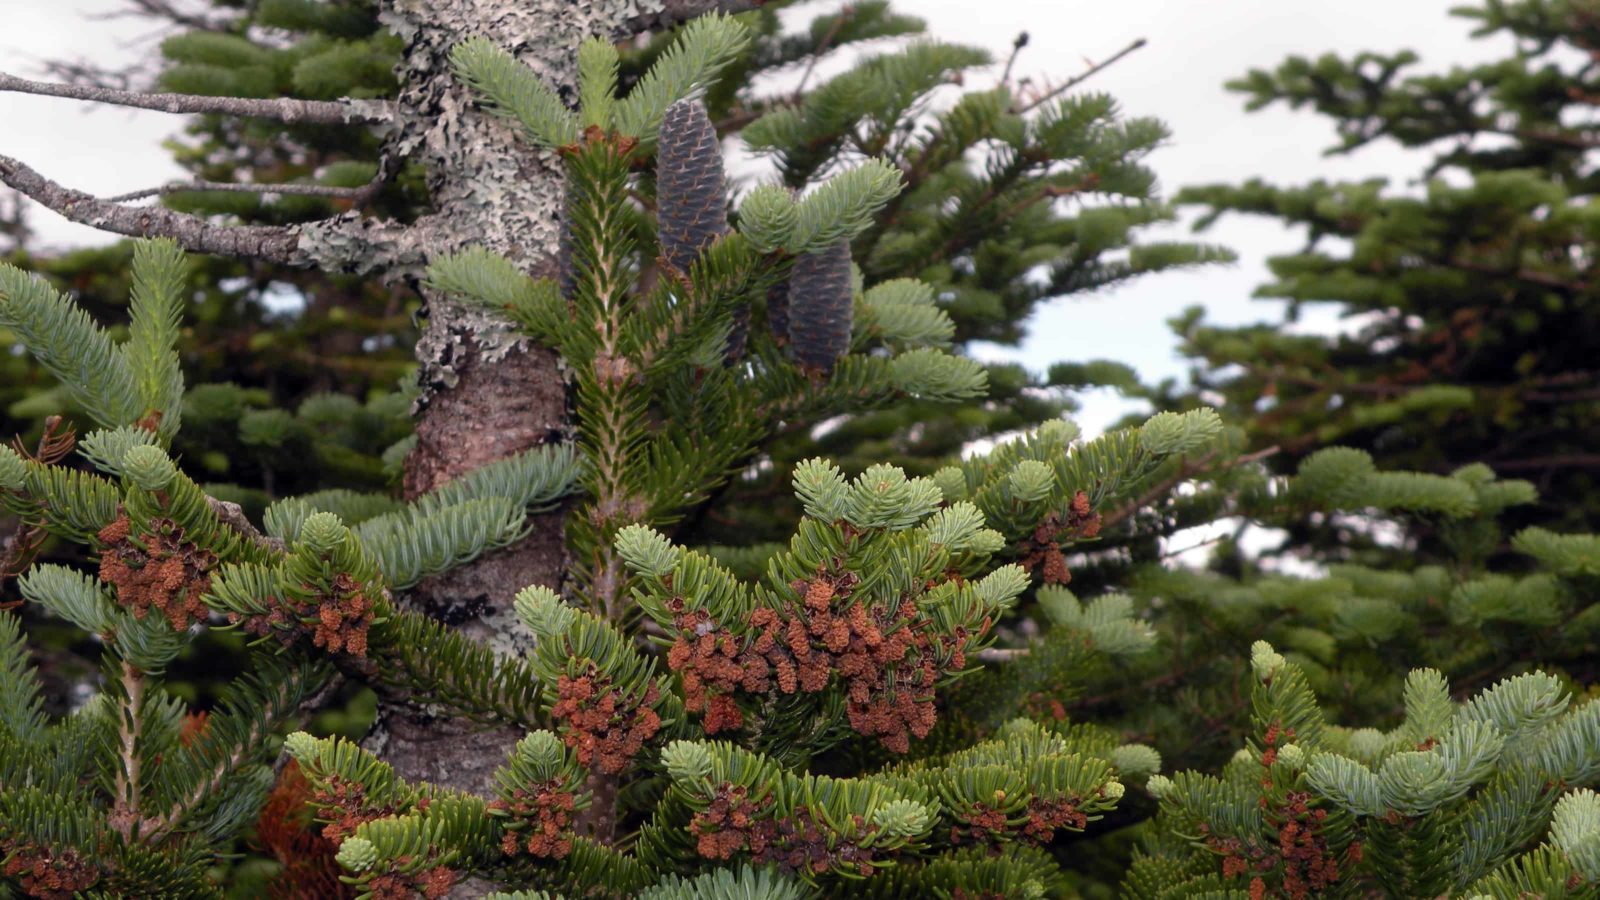 Abies balsamea (balsam fir), male and female cones, Mount Mansfield, Underhill, Vt. Creative Commons courtesy photo.